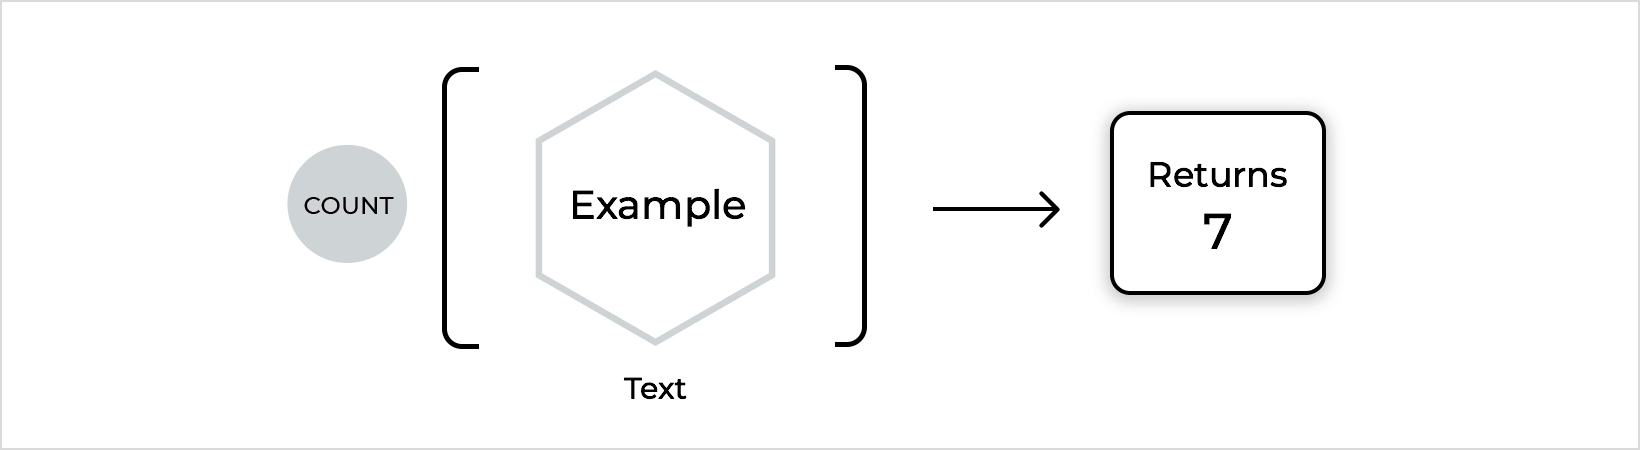 Count Example